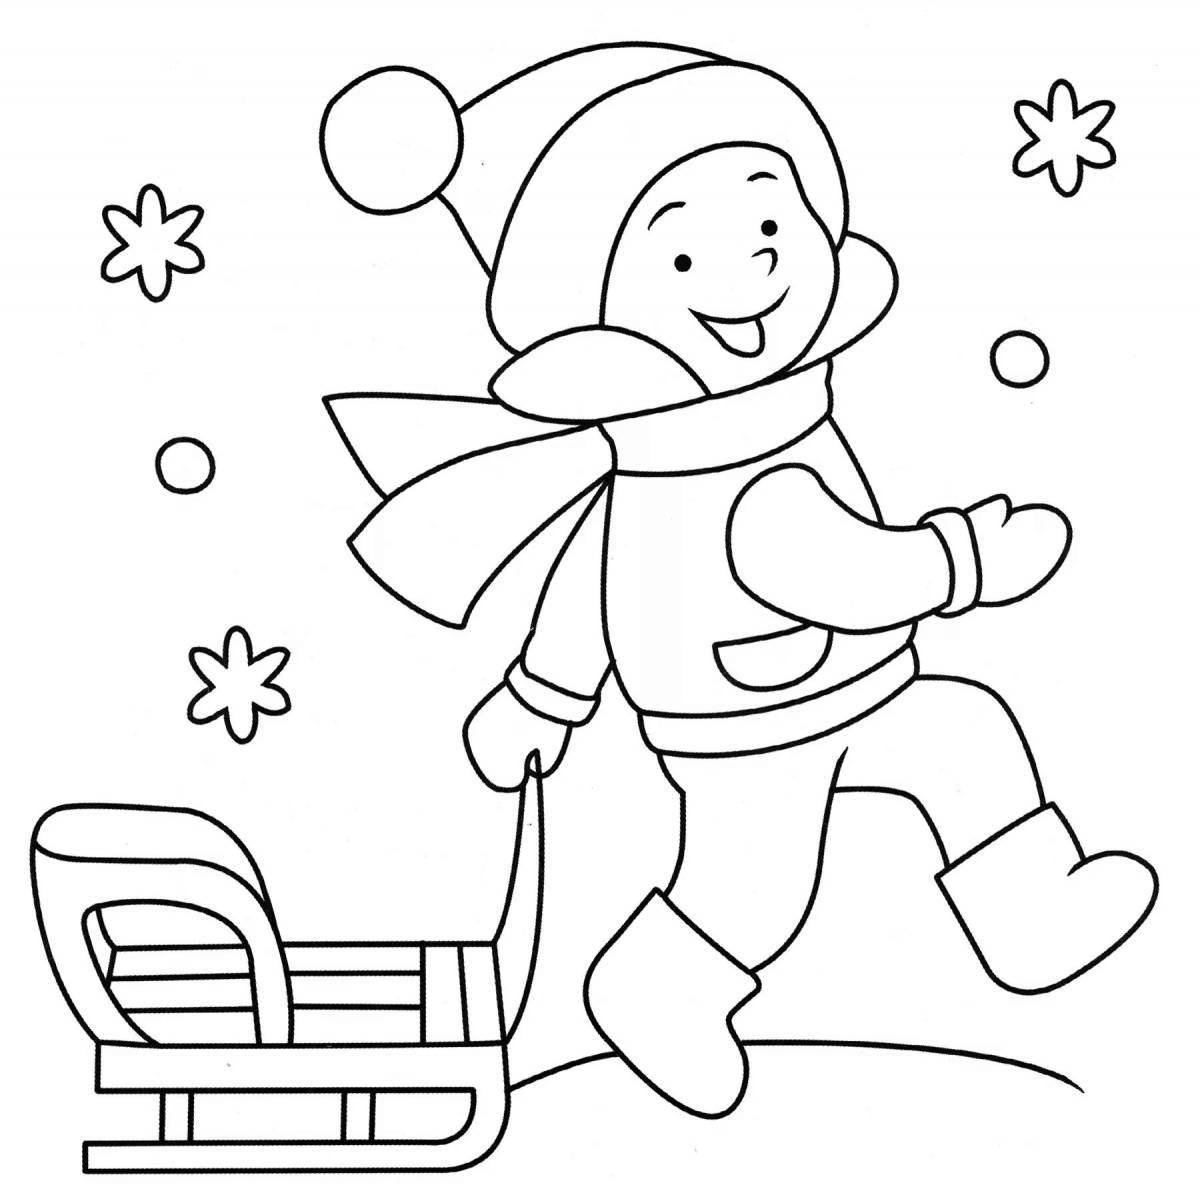 Dazzling winter coloring book for kids